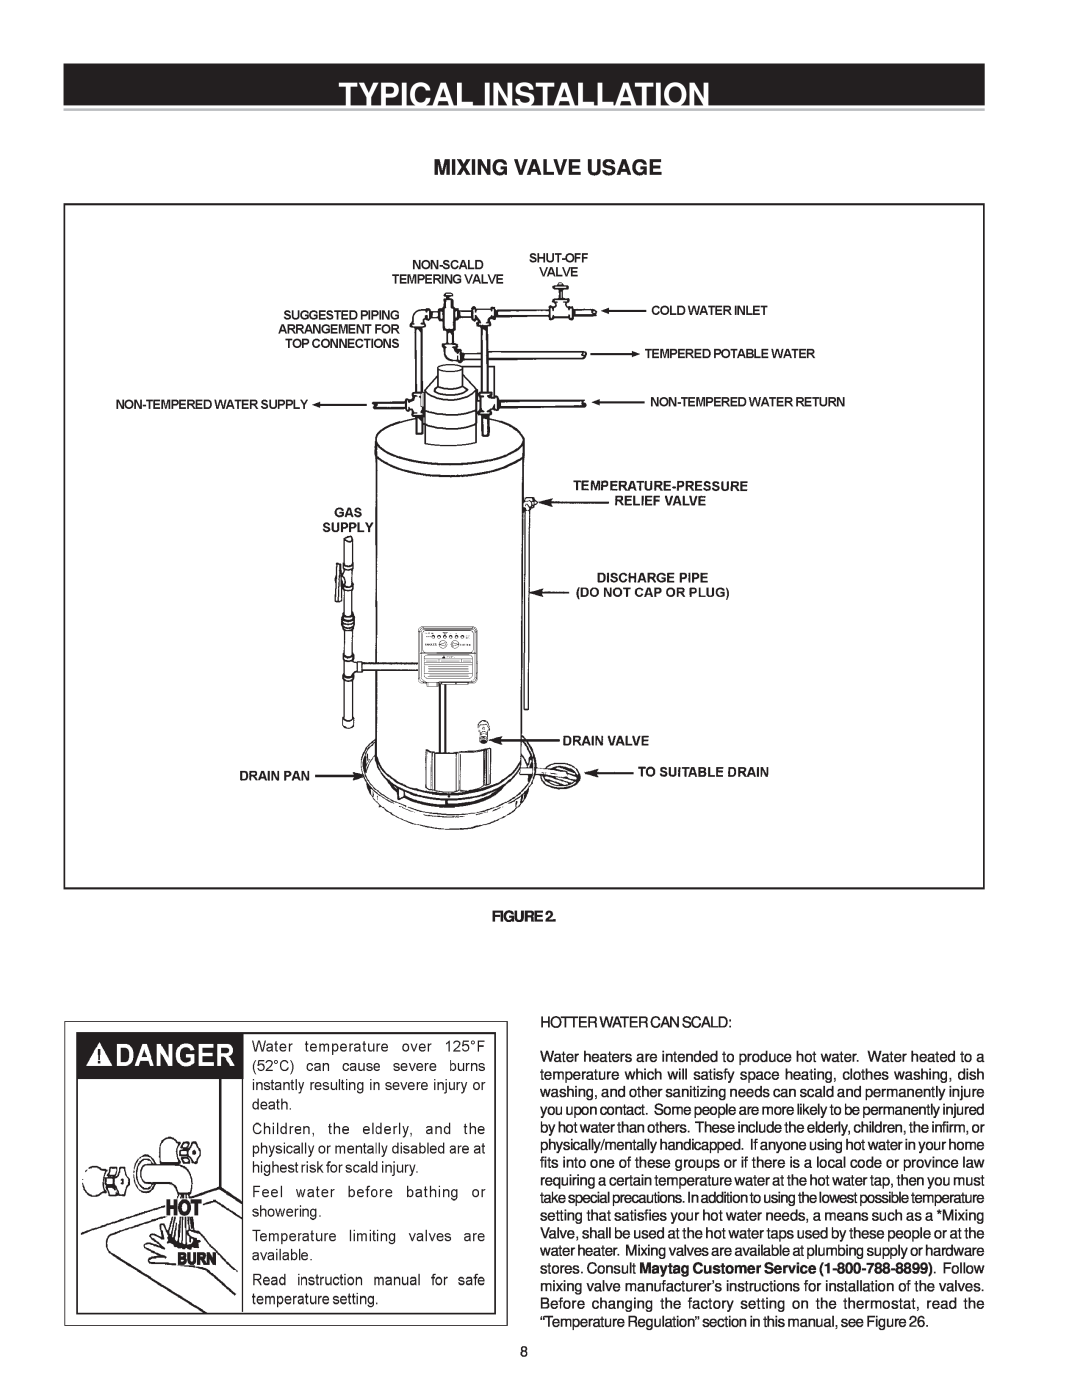 Maytag HVN41240PCGA, HVN41250VCGA, HVN41250PCGA, HVP41250PCGA, HVP41250VCGA manual Typical Installation, Mixing Valve Usage 